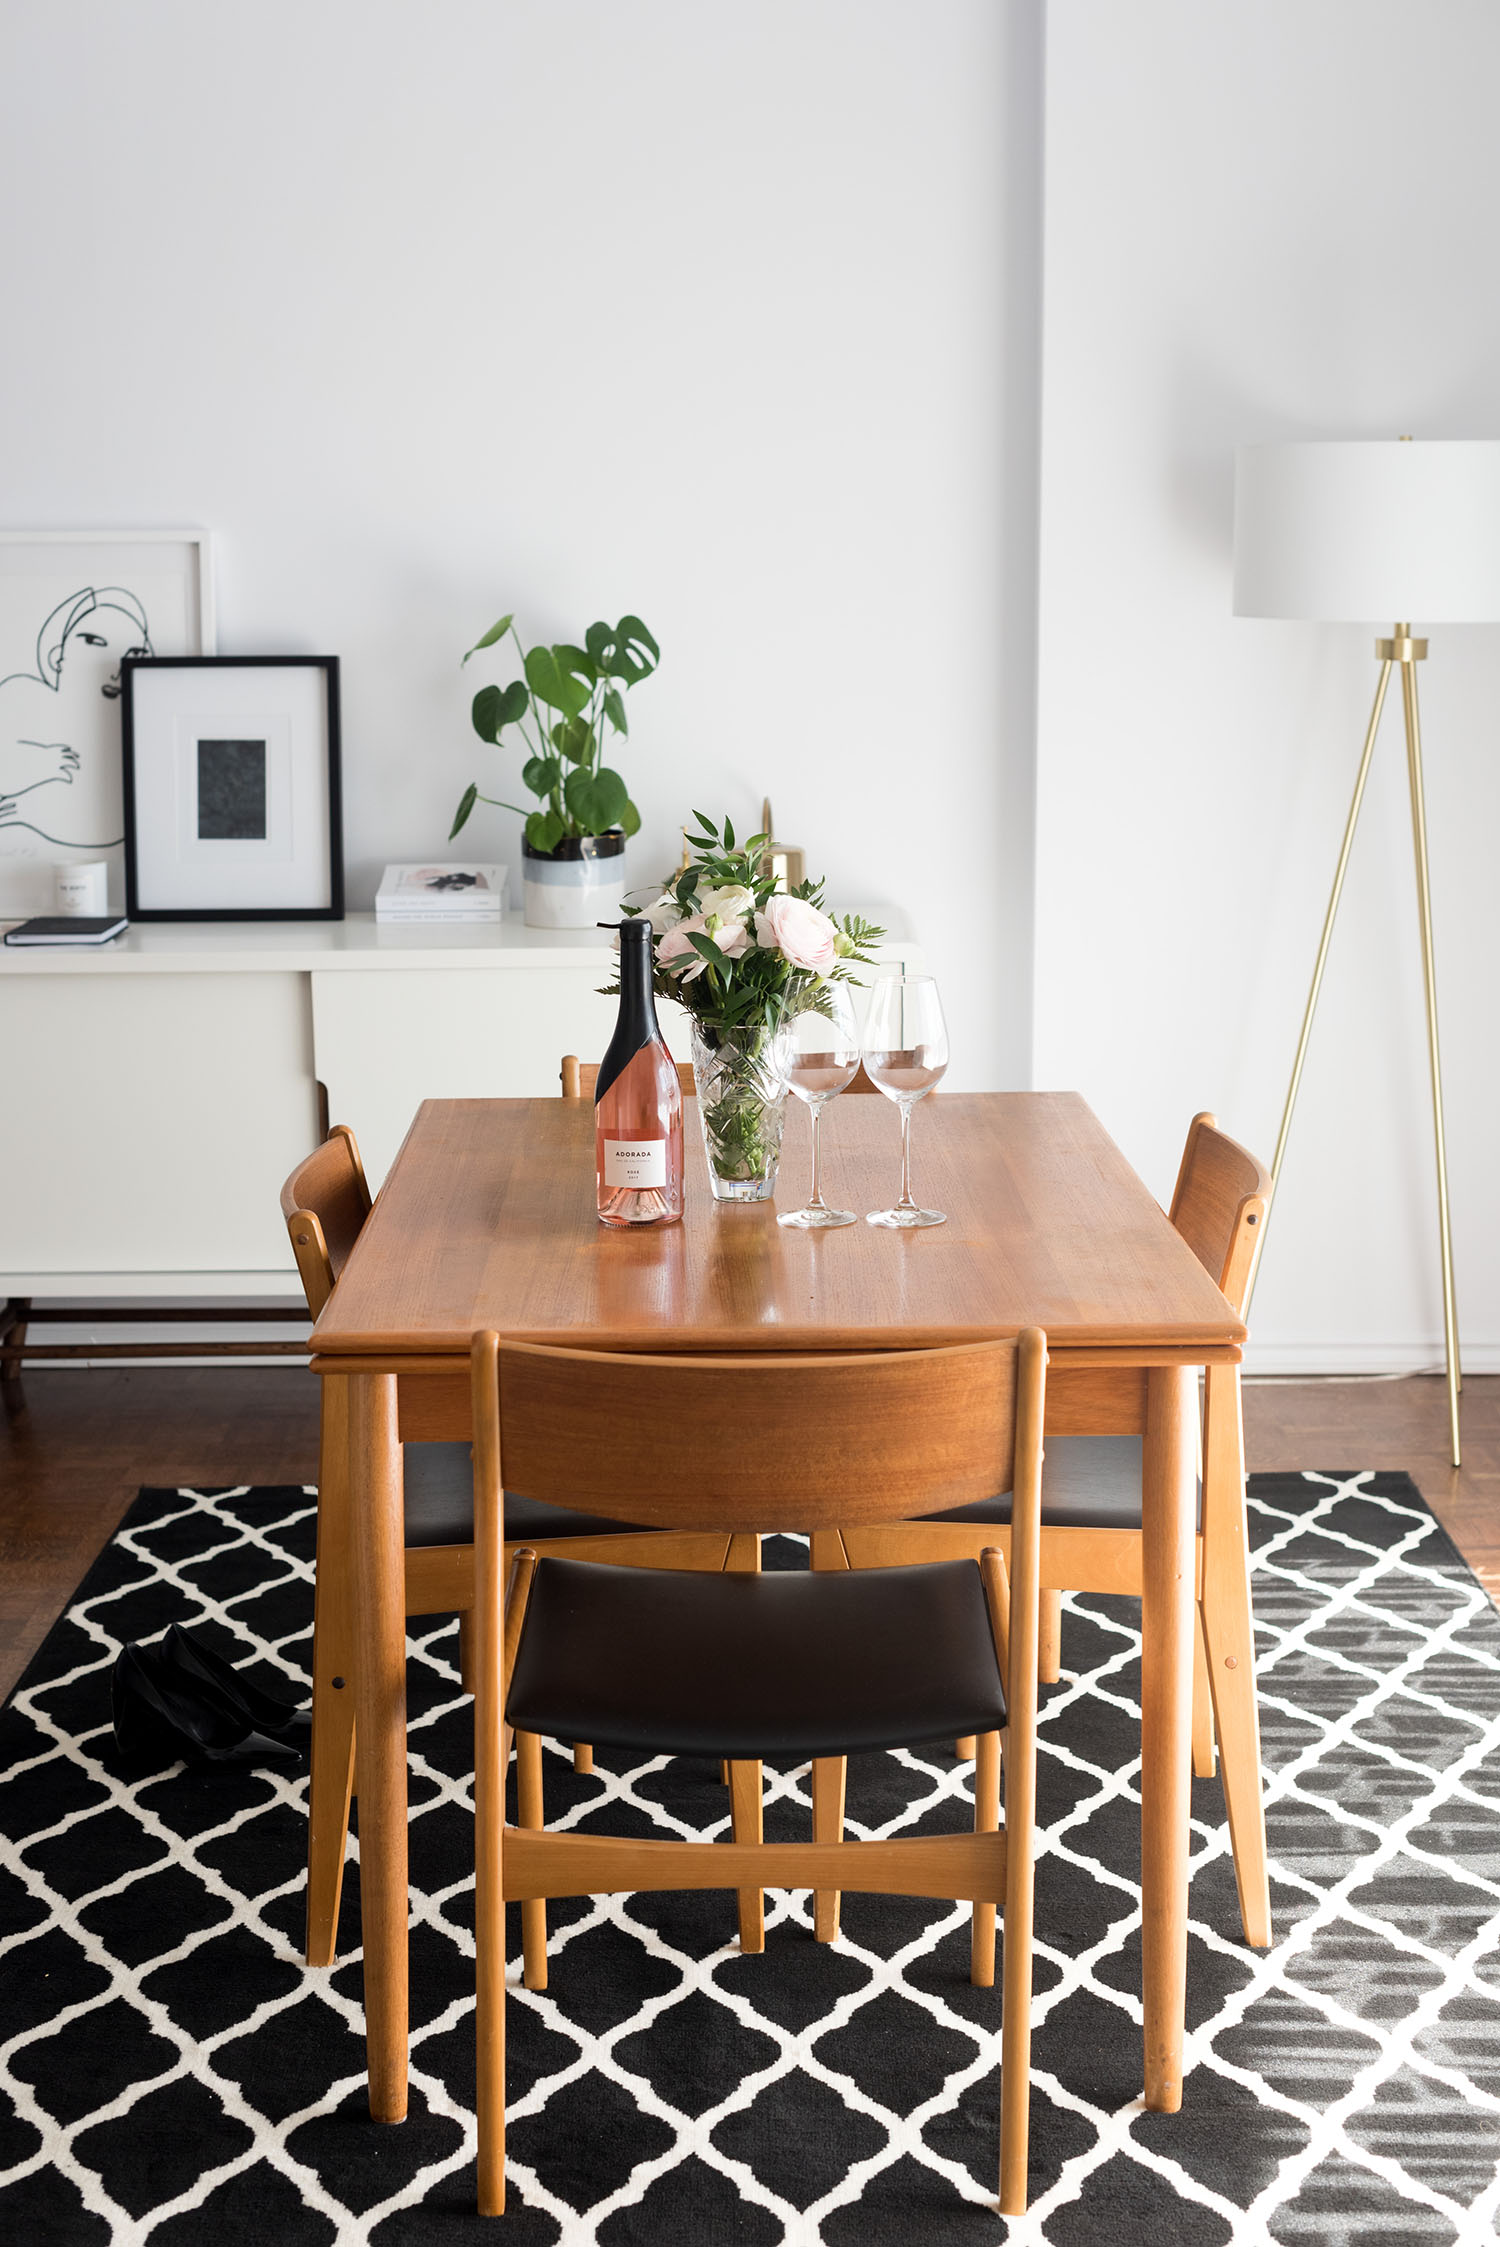 A vintage dining table in the dining room belonging to top Winnipeg lifestyle blogger Cee Fardoe of Coco & Vera